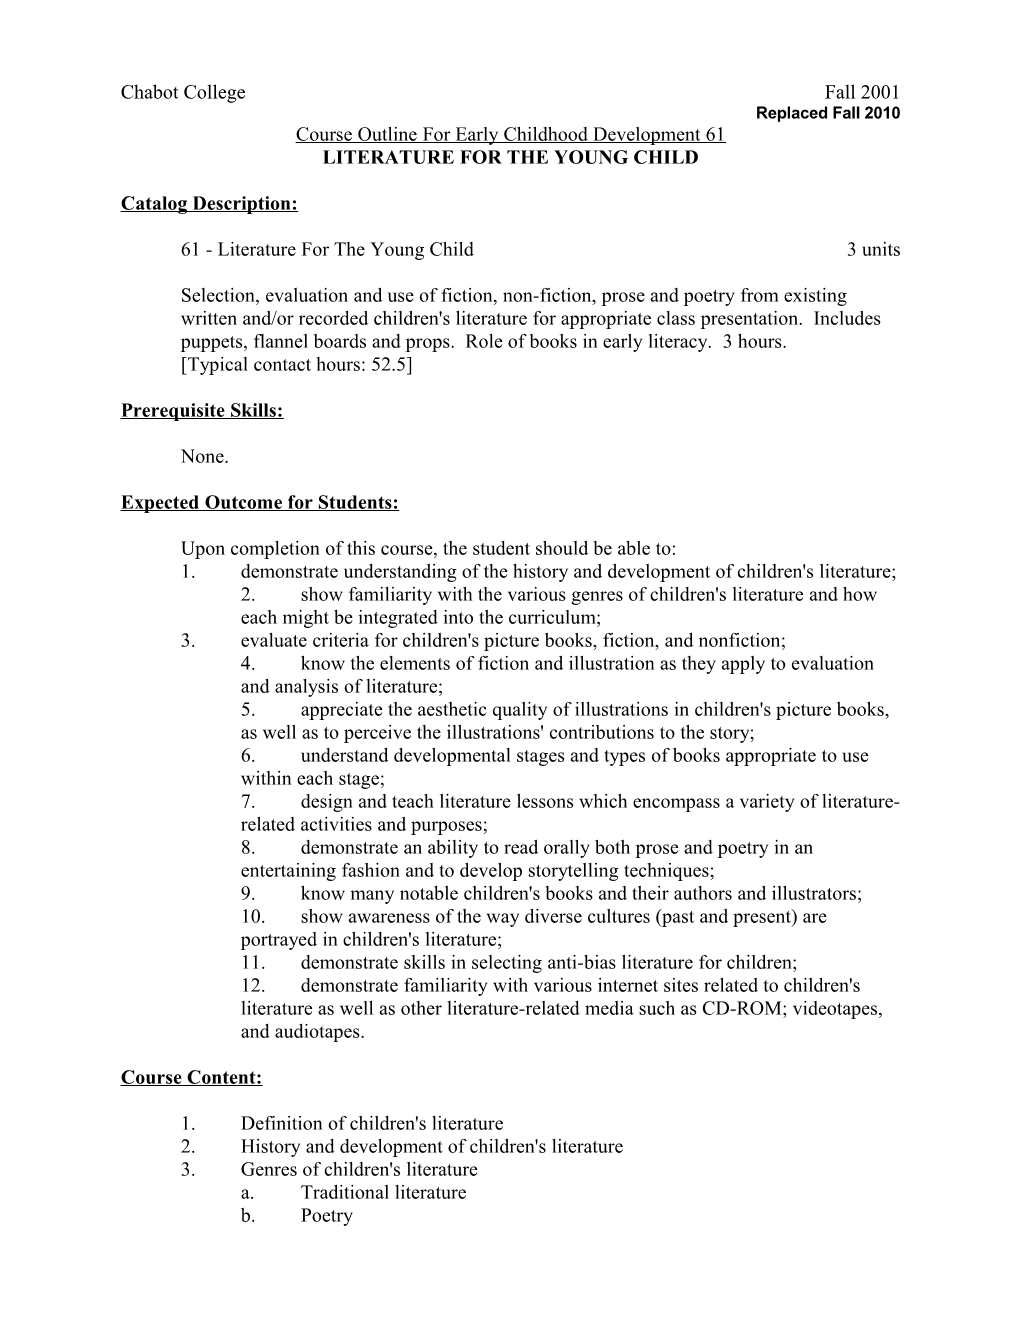 Course Outline for ECD 61, Page 1